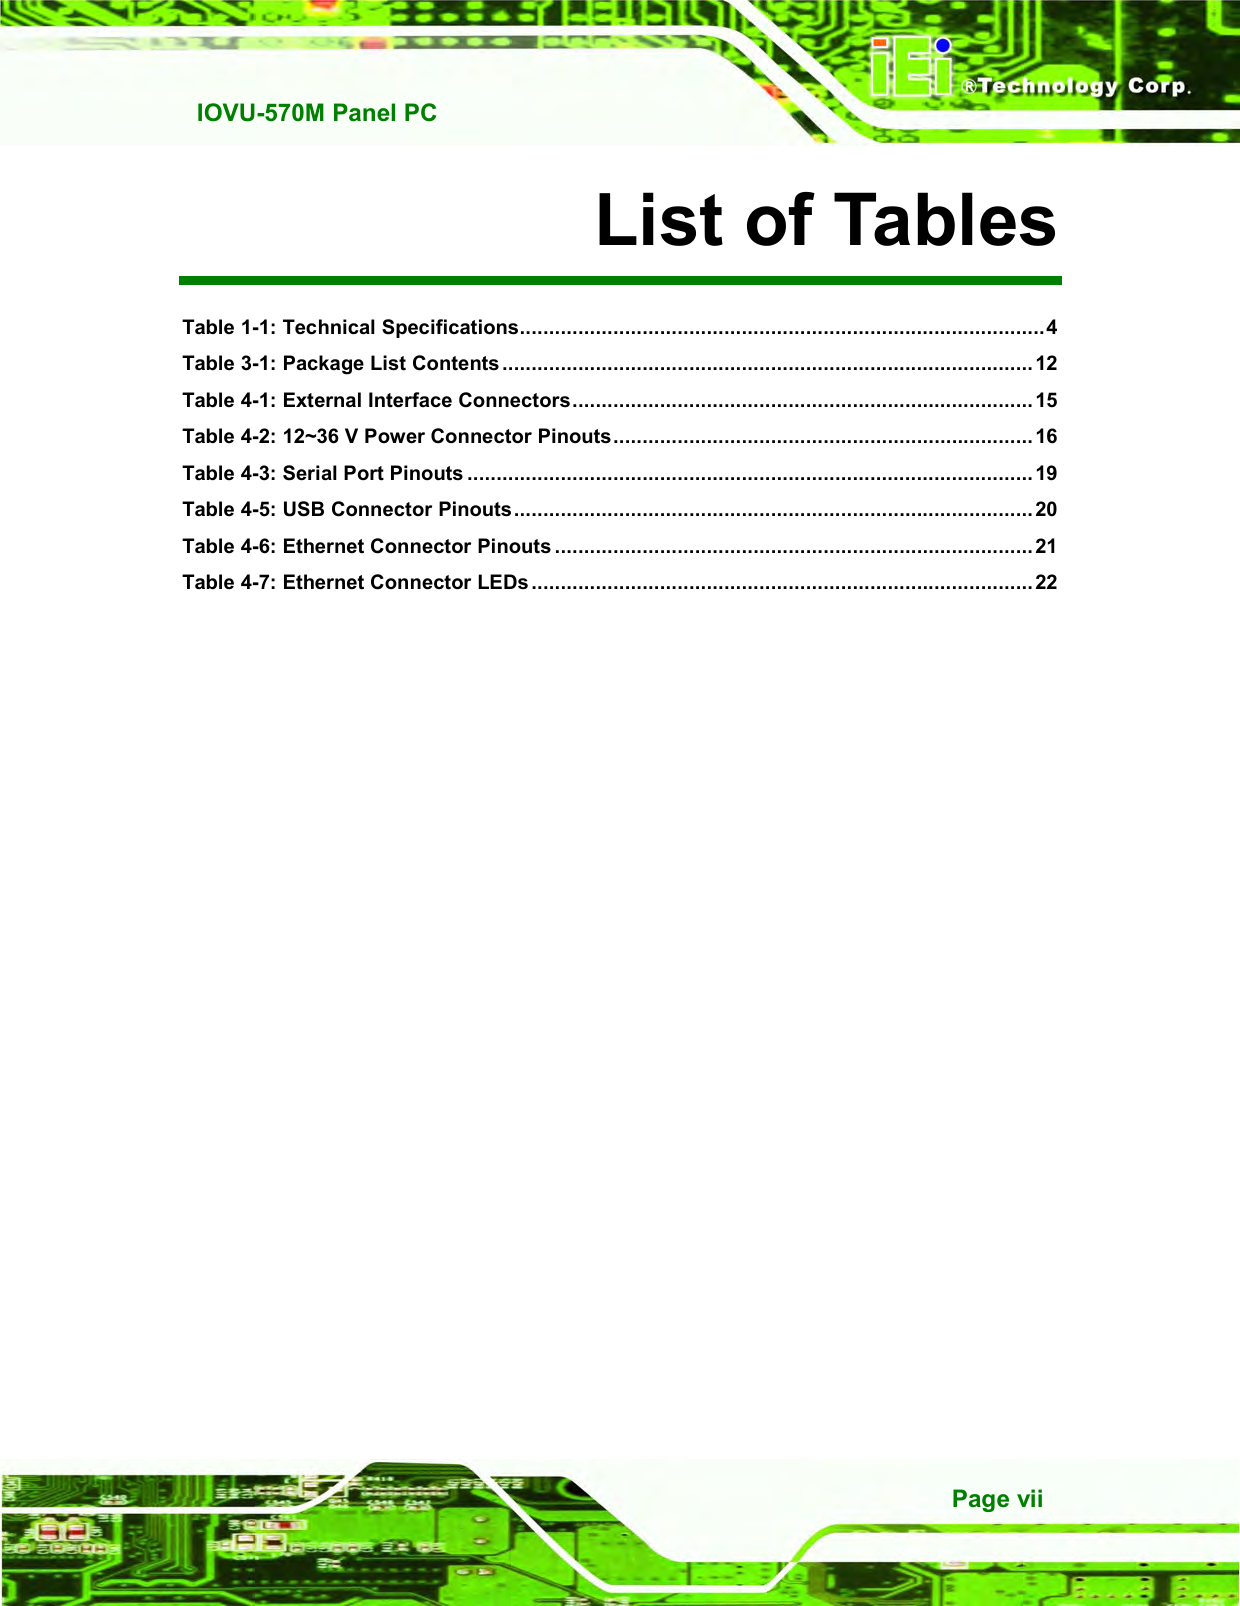   IOVU-570M Panel PC Page vii List of Tables Table 1-1: Technical Specifications..........................................................................................4 Table 3-1: Package List Contents ........................................................................................... 12 Table 4-1: External Interface Connectors............................................................................... 15 Table 4-2: 12~36 V Power Connector Pinouts........................................................................ 16 Table 4-3: Serial Port Pinouts .................................................................................................19 Table 4-5: USB Connector Pinouts......................................................................................... 20 Table 4-6: Ethernet Connector Pinouts .................................................................................. 21 Table 4-7: Ethernet Connector LEDs ......................................................................................22   